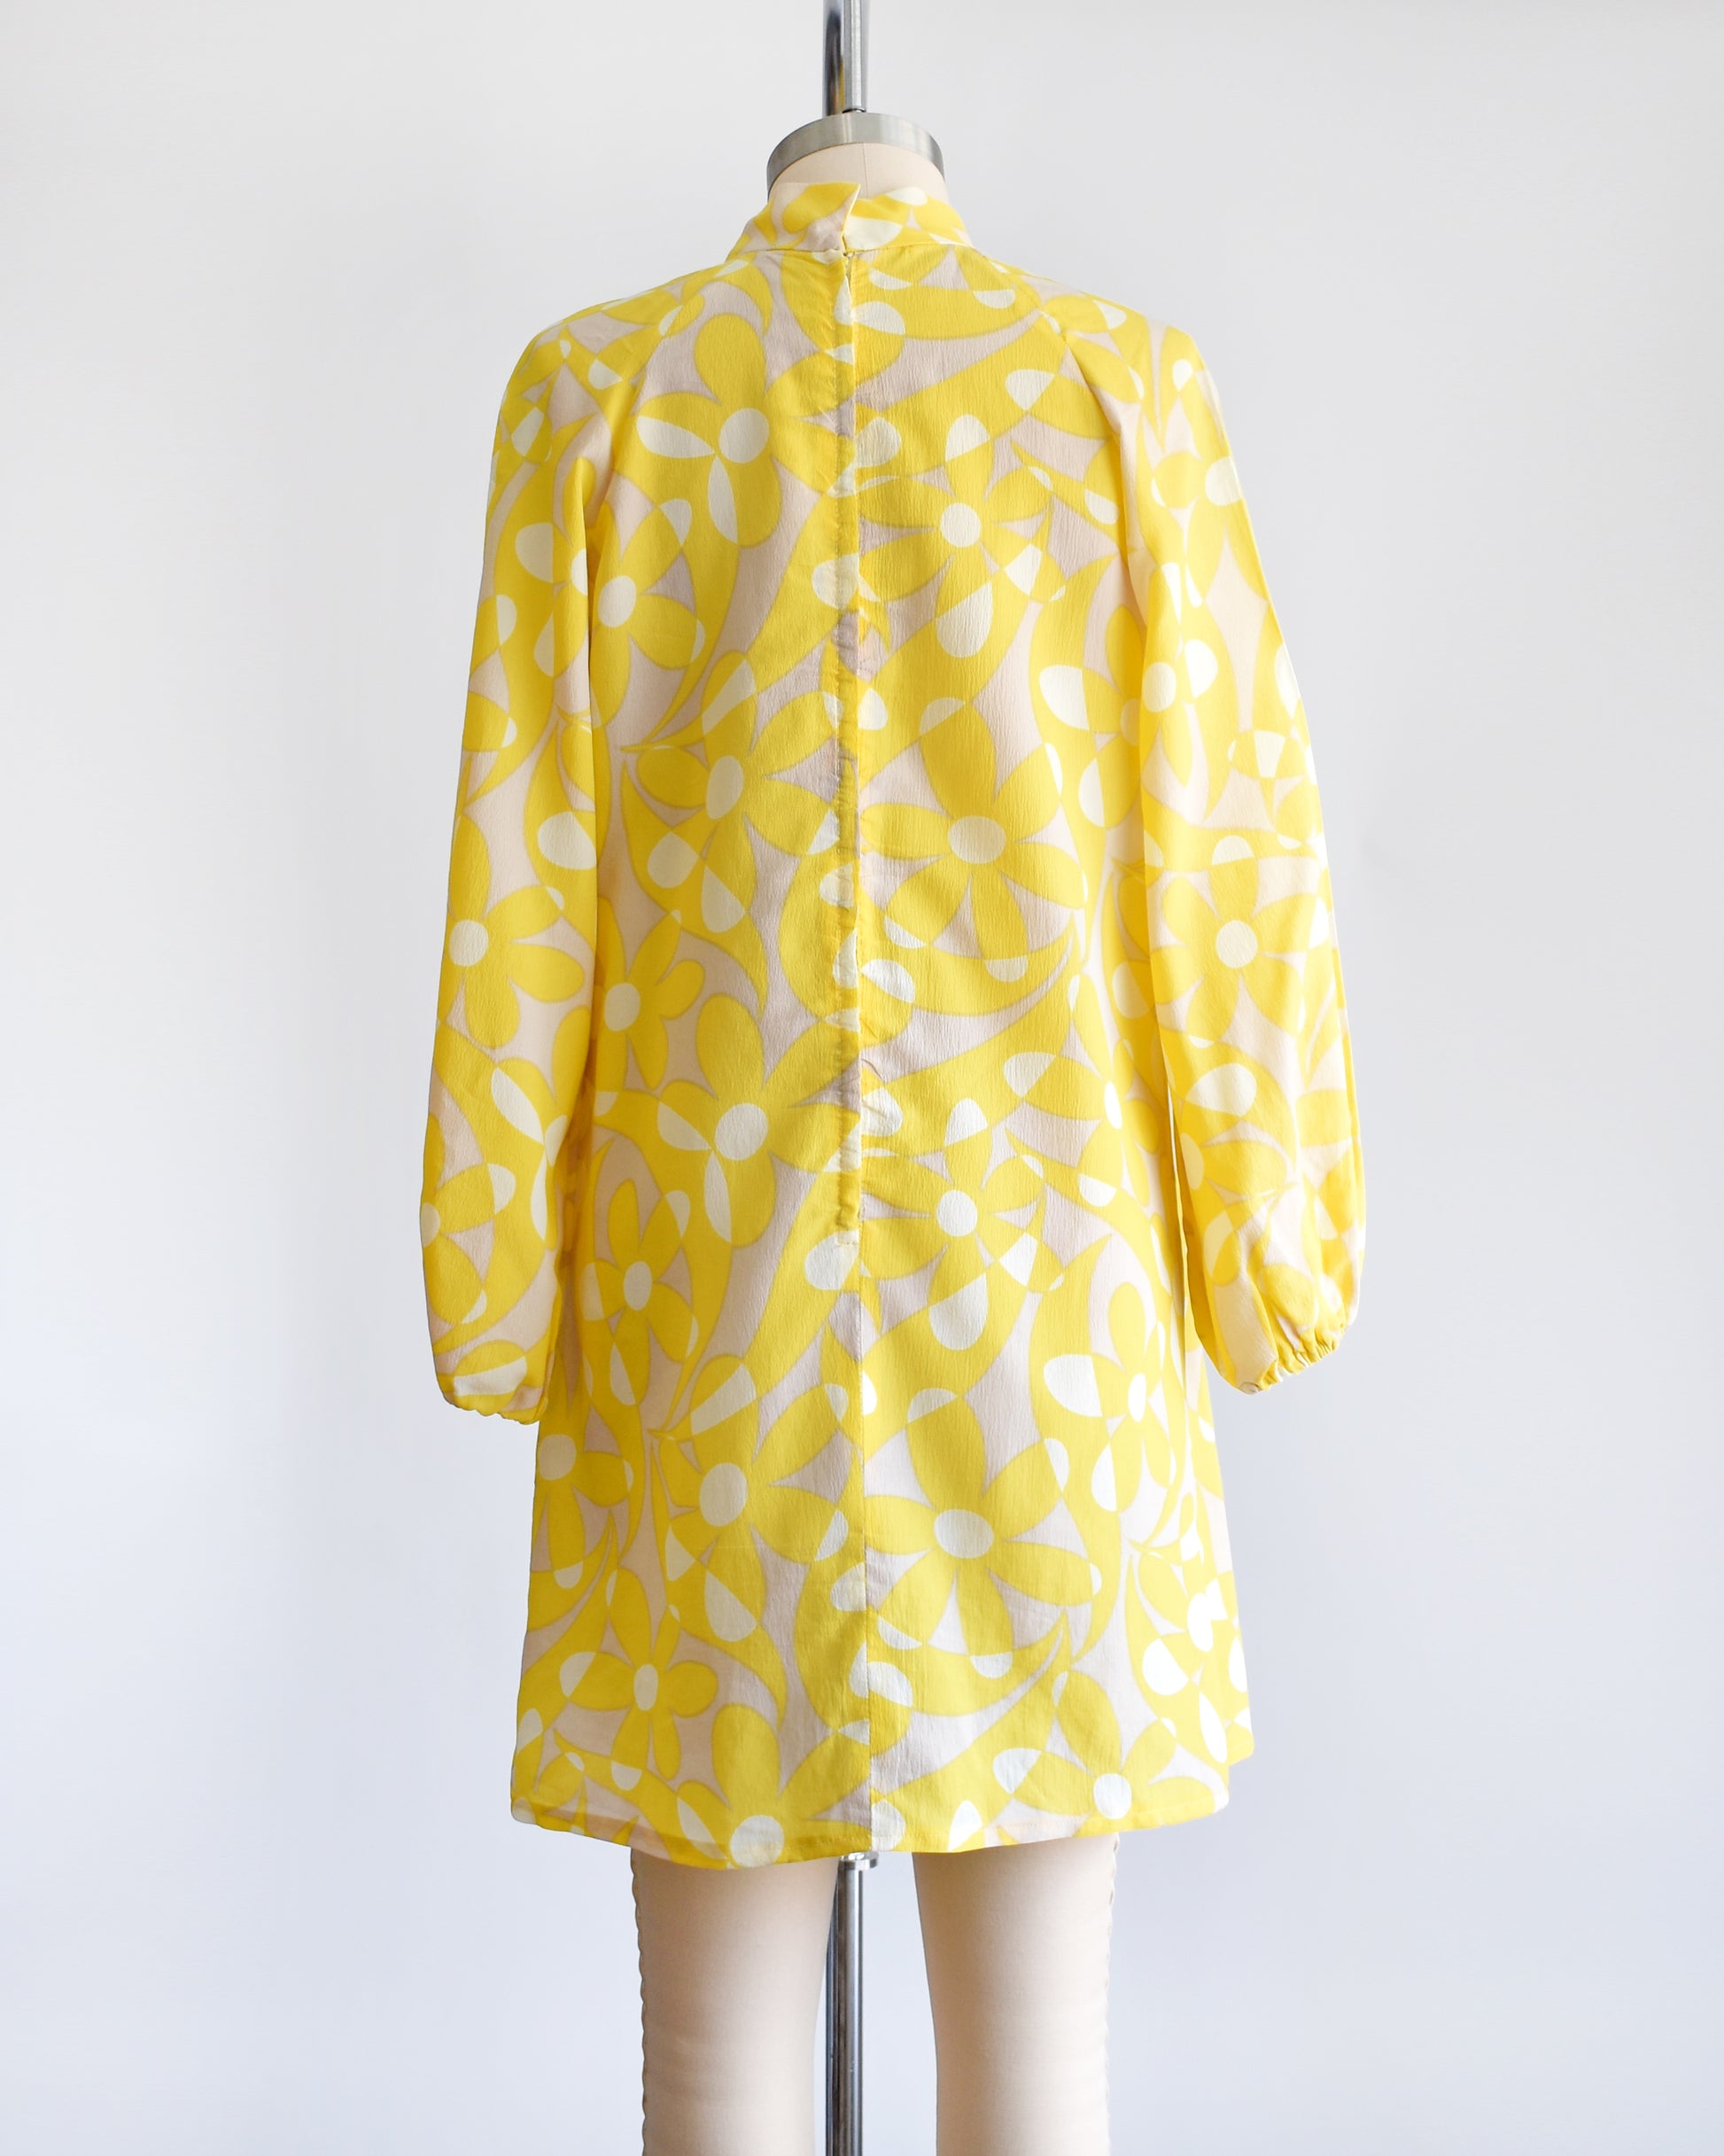 Back view if a vintage 1960s mod mini dress features a bright yellow and white floral pattern with swirls, set on a pale beige background. There's a zipper up the back